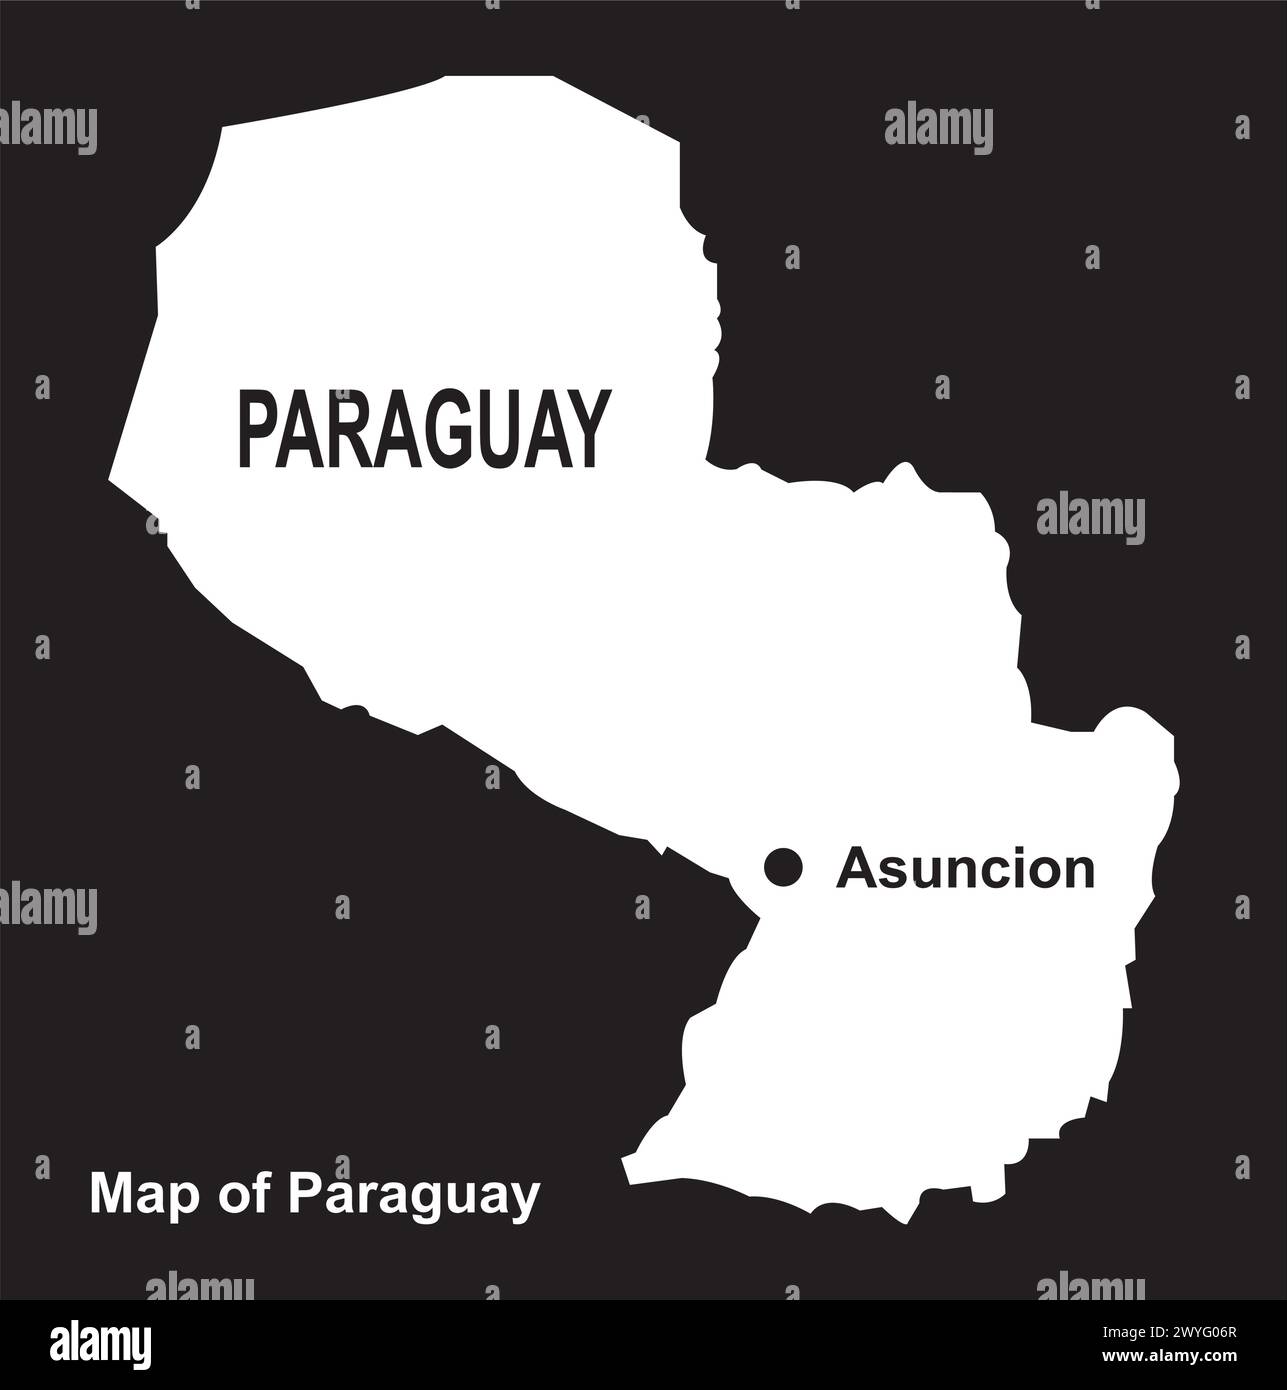 Paraguy map icon vector illustration design Stock Vector